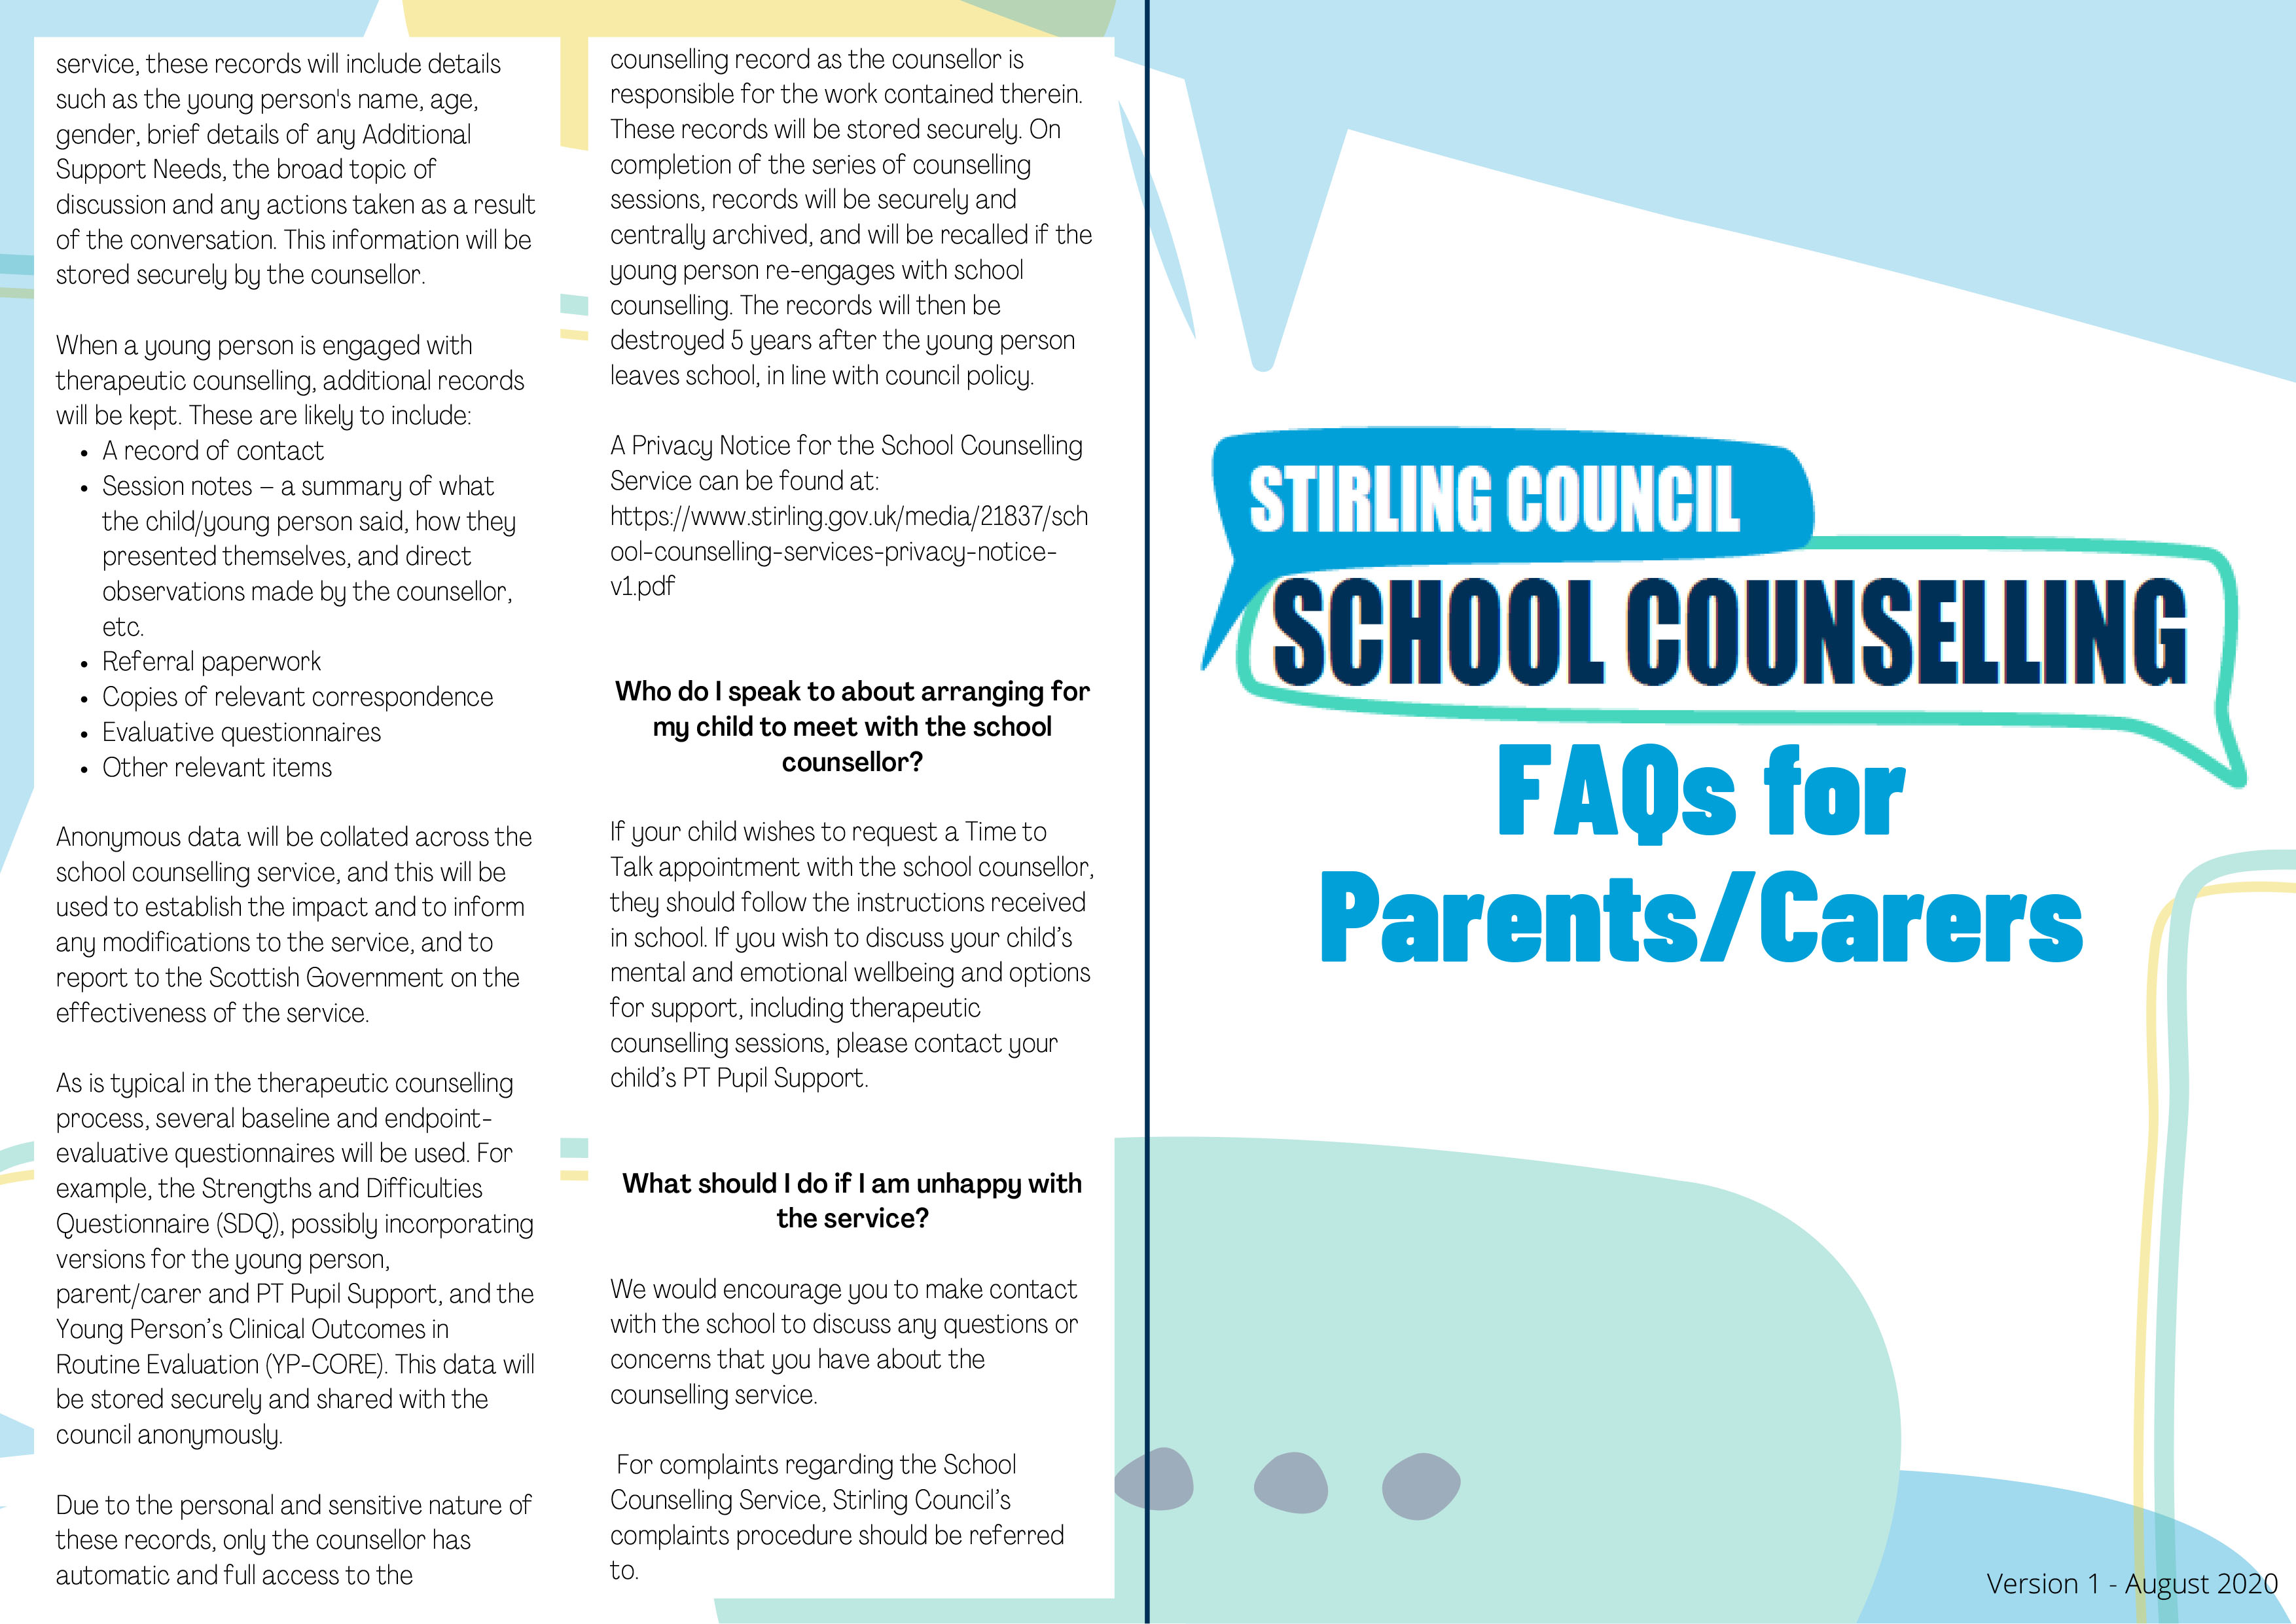 School Counselling FAQs for parents carers Oct 1